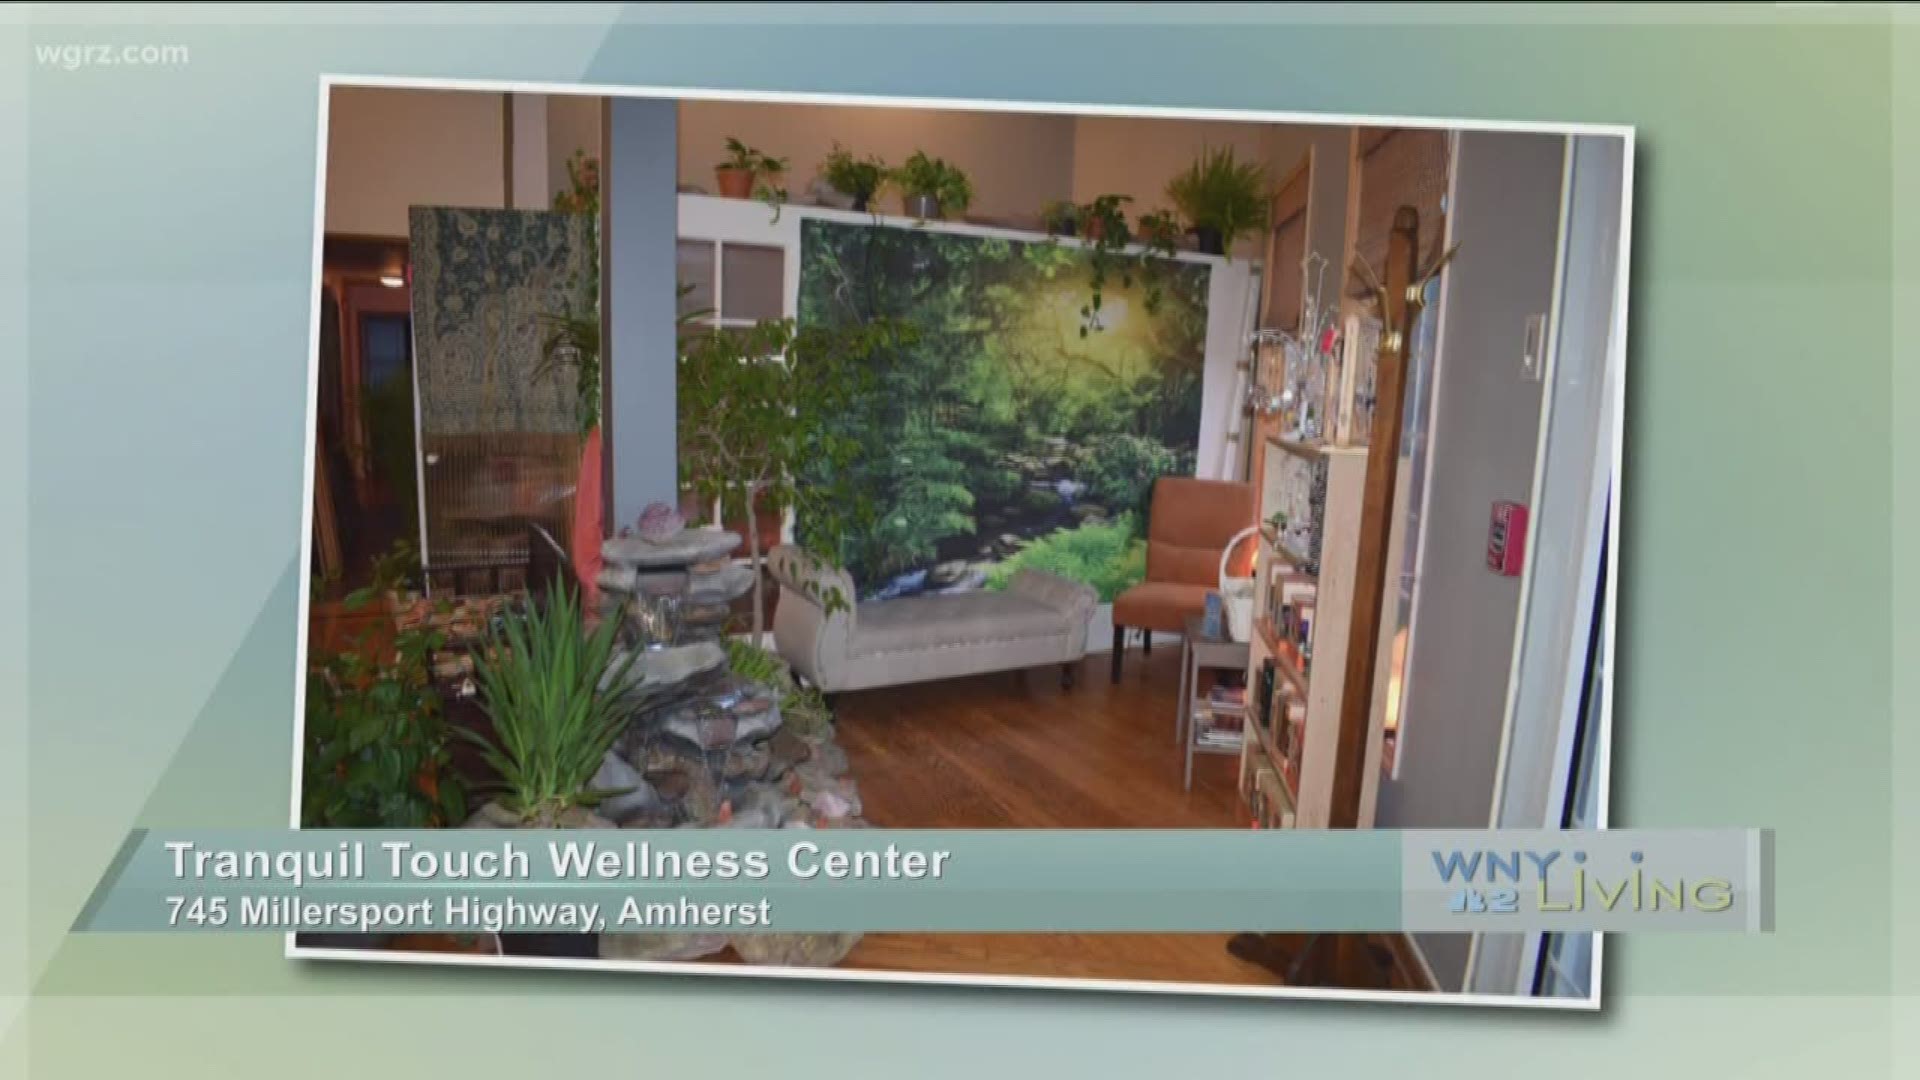 WNY Living - February 18 - Tranquil Touch Wellness Center